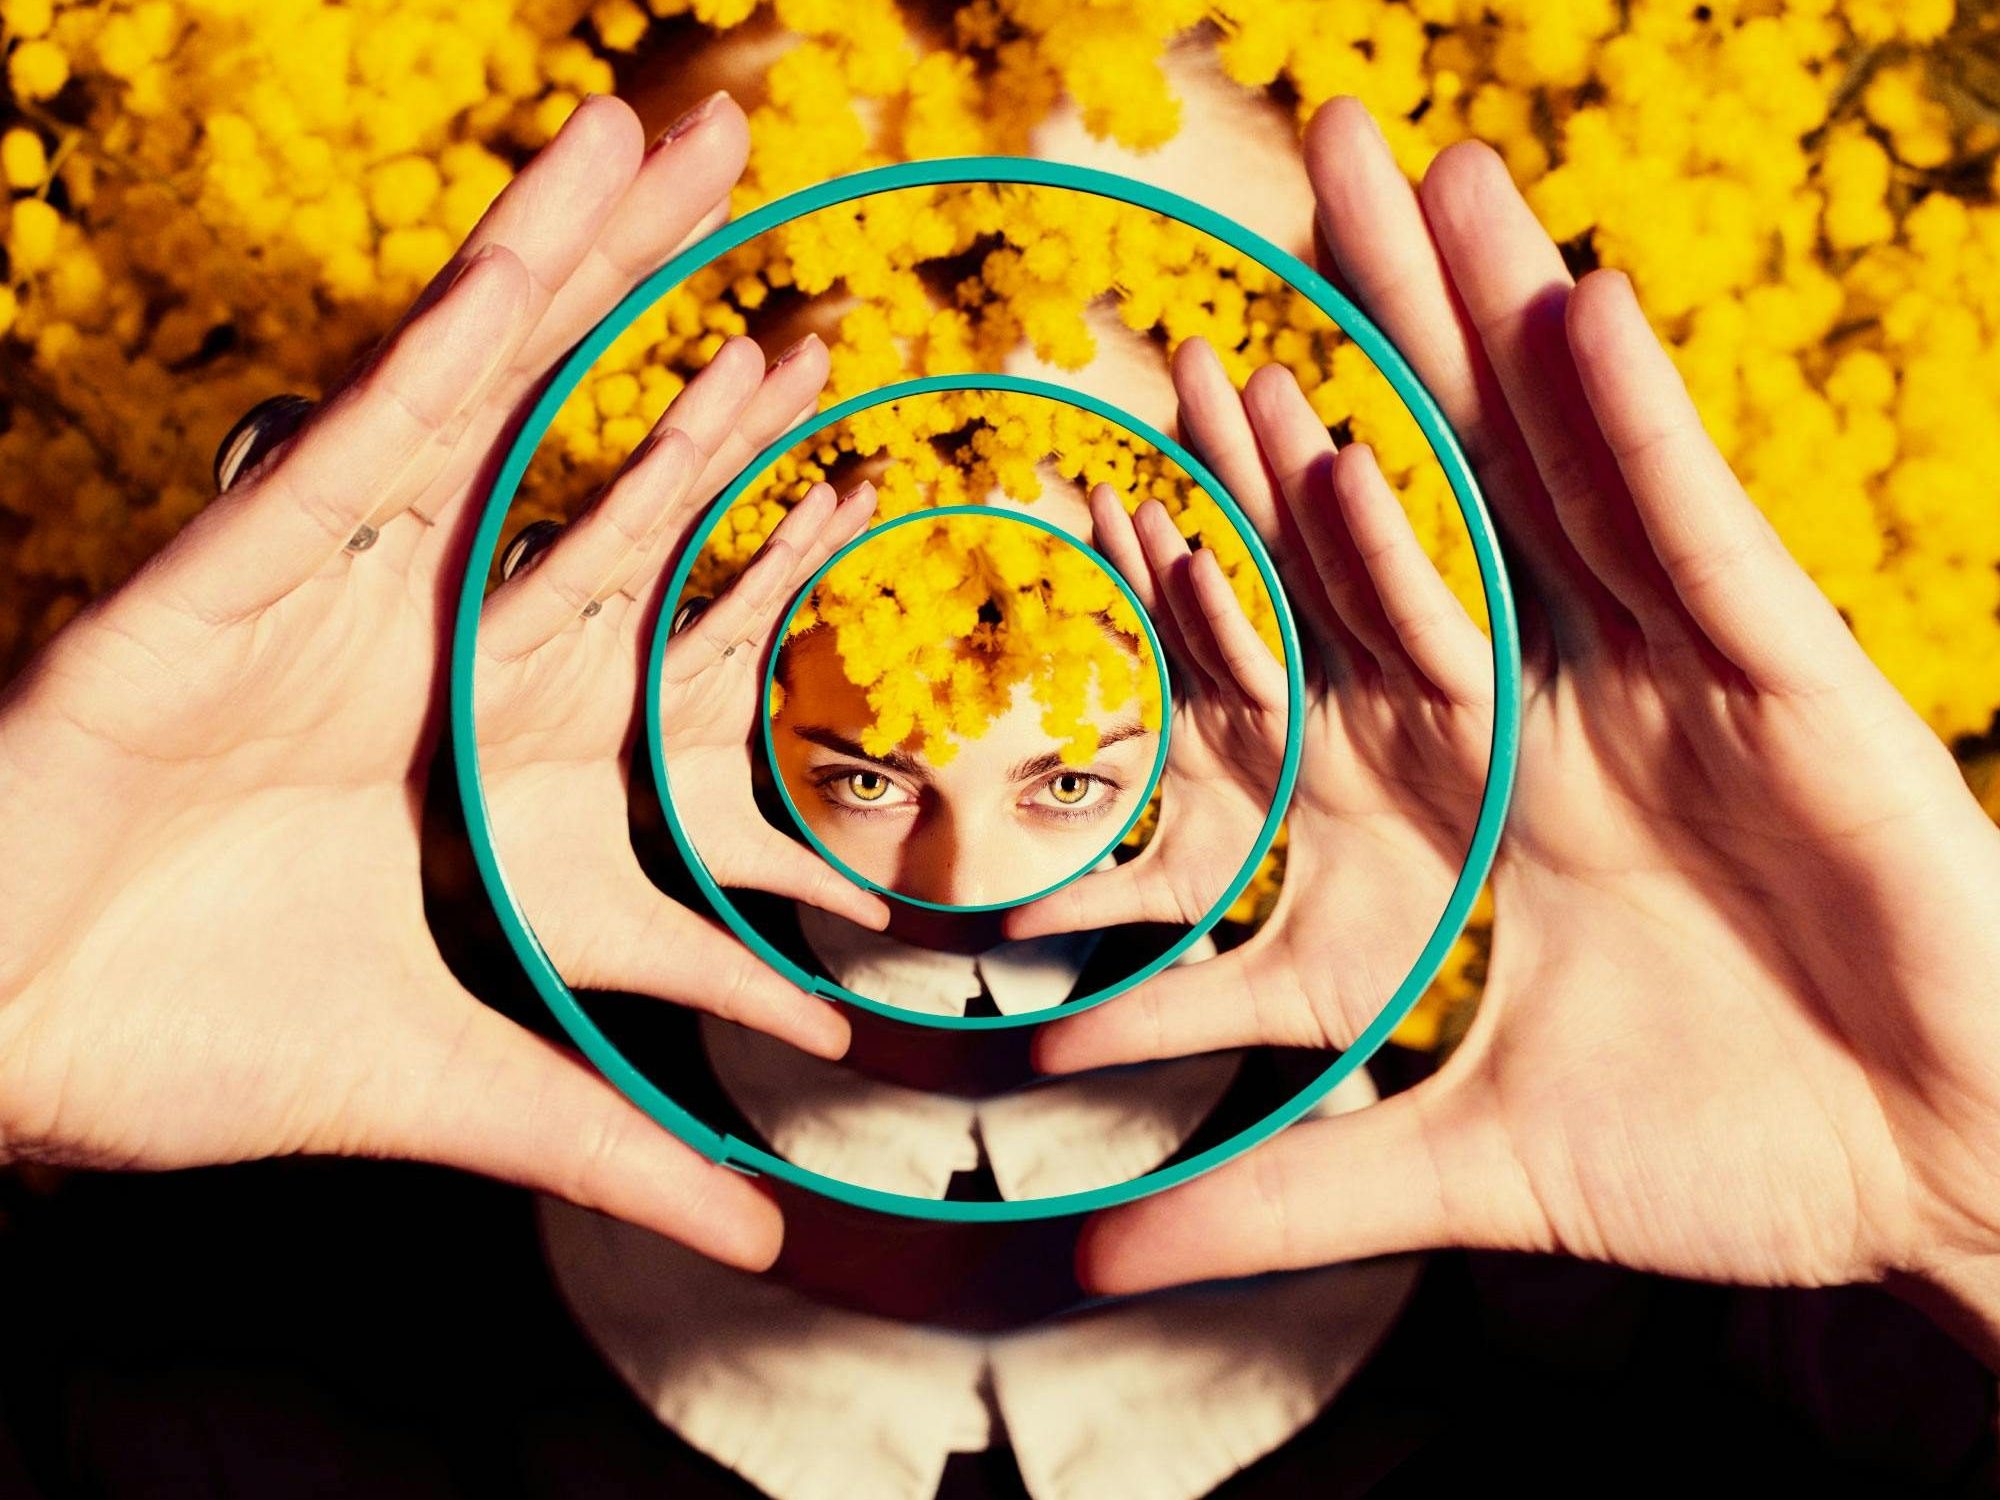 Image of a woman with bright yellow curly hair looking at a reflection of herself as contained within a series of nested circular mirrors